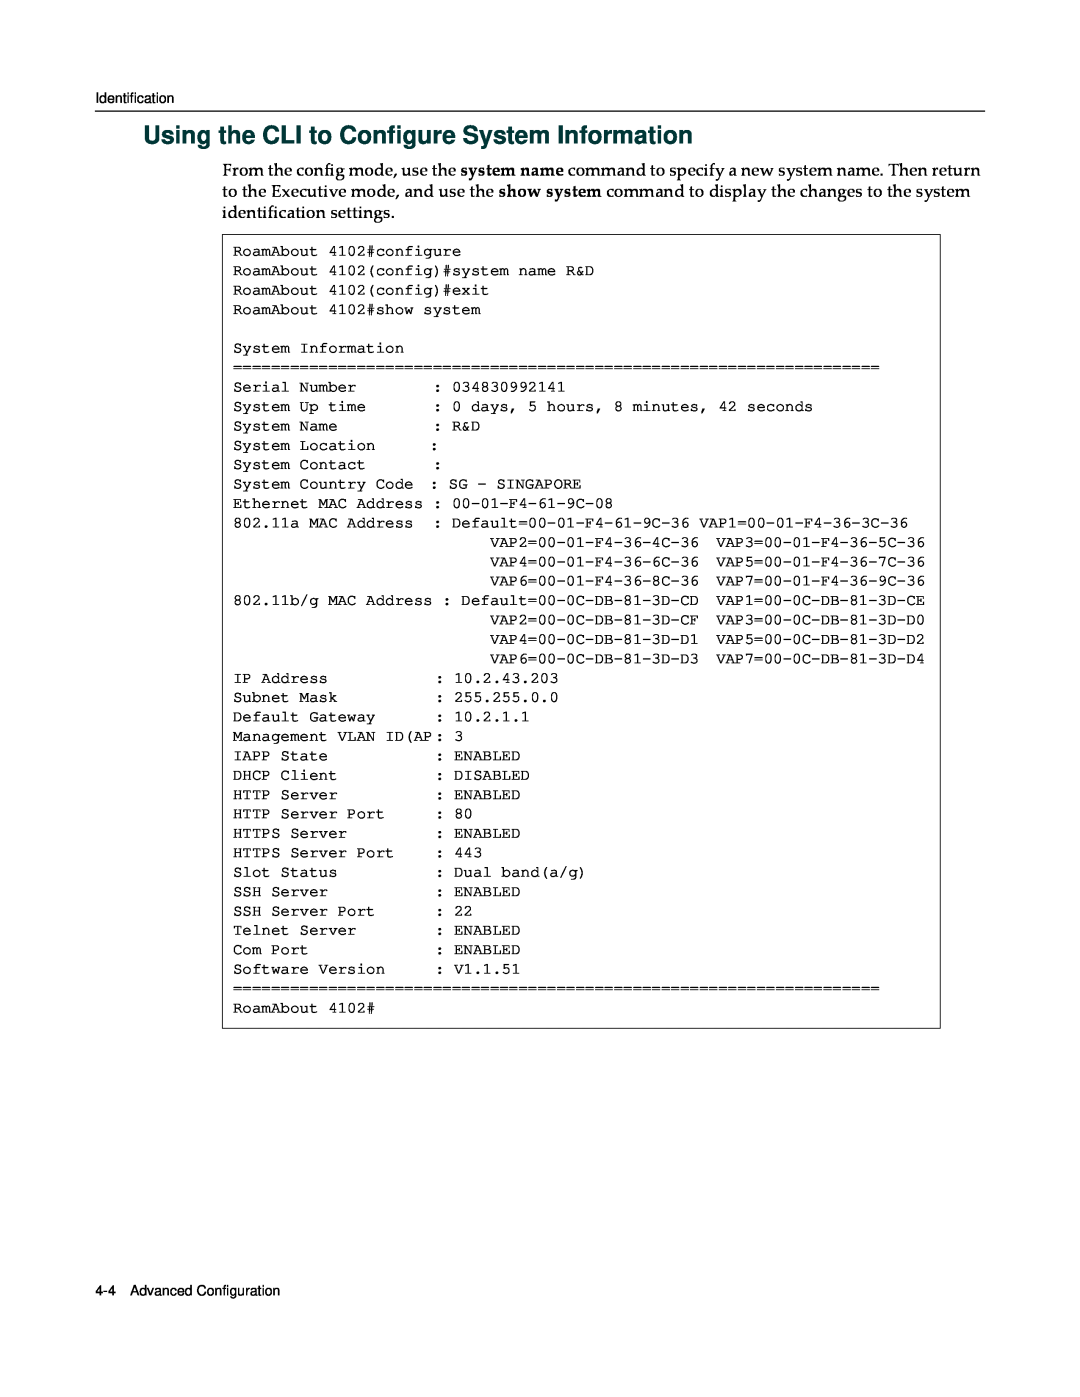 Enterasys Networks RBT-4102 manual Using the CLI to Configure System Information 